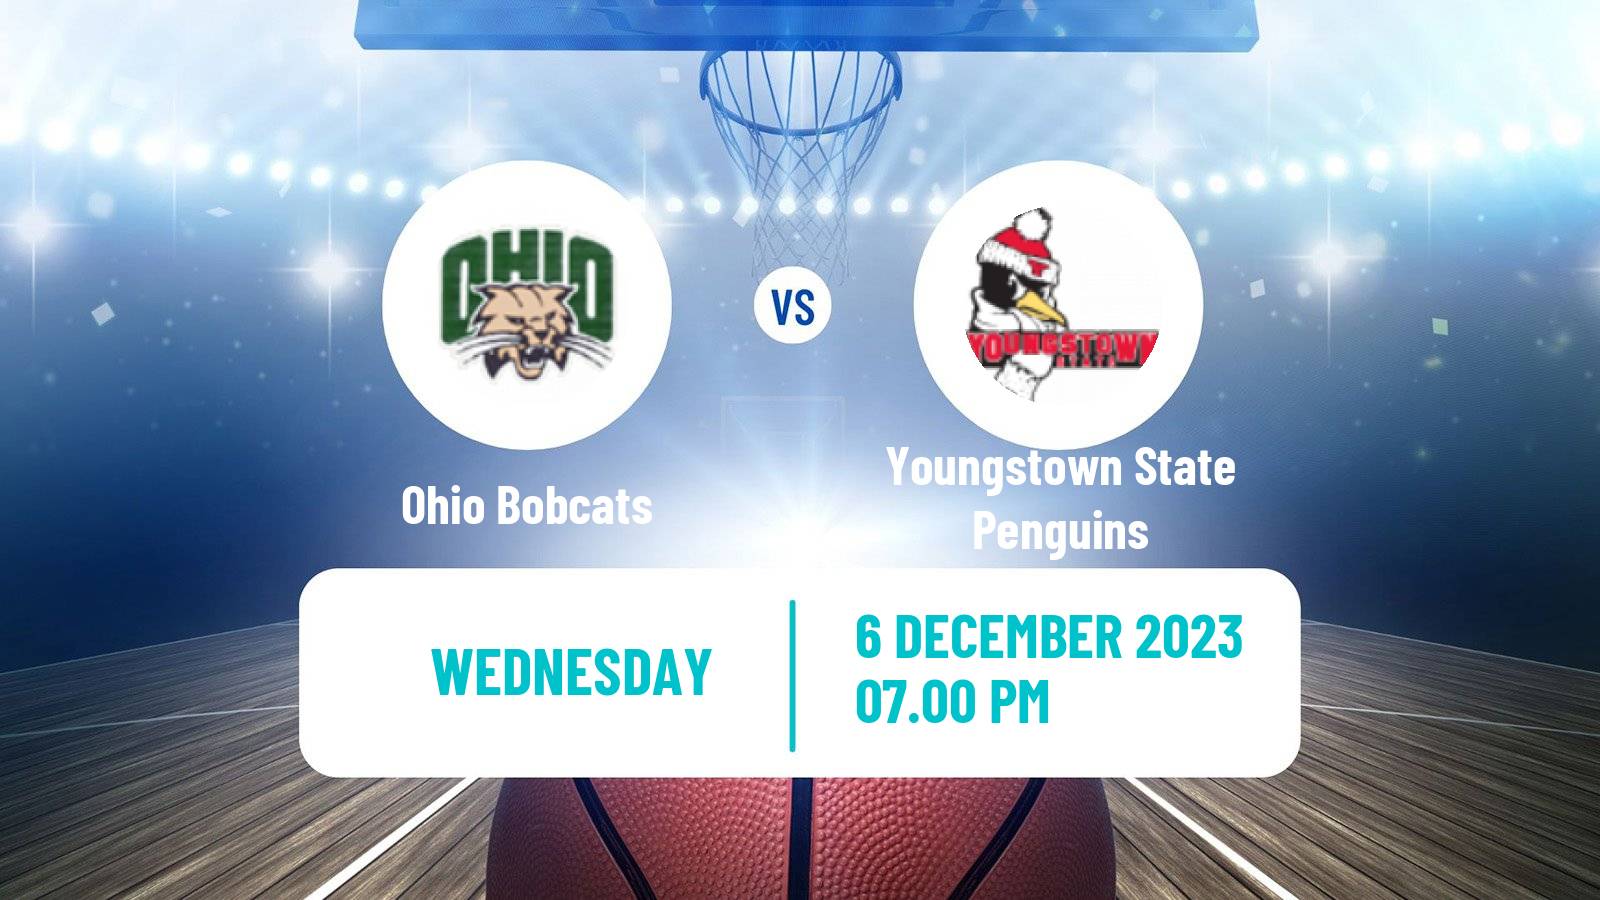 Basketball NCAA College Basketball Ohio Bobcats - Youngstown State Penguins